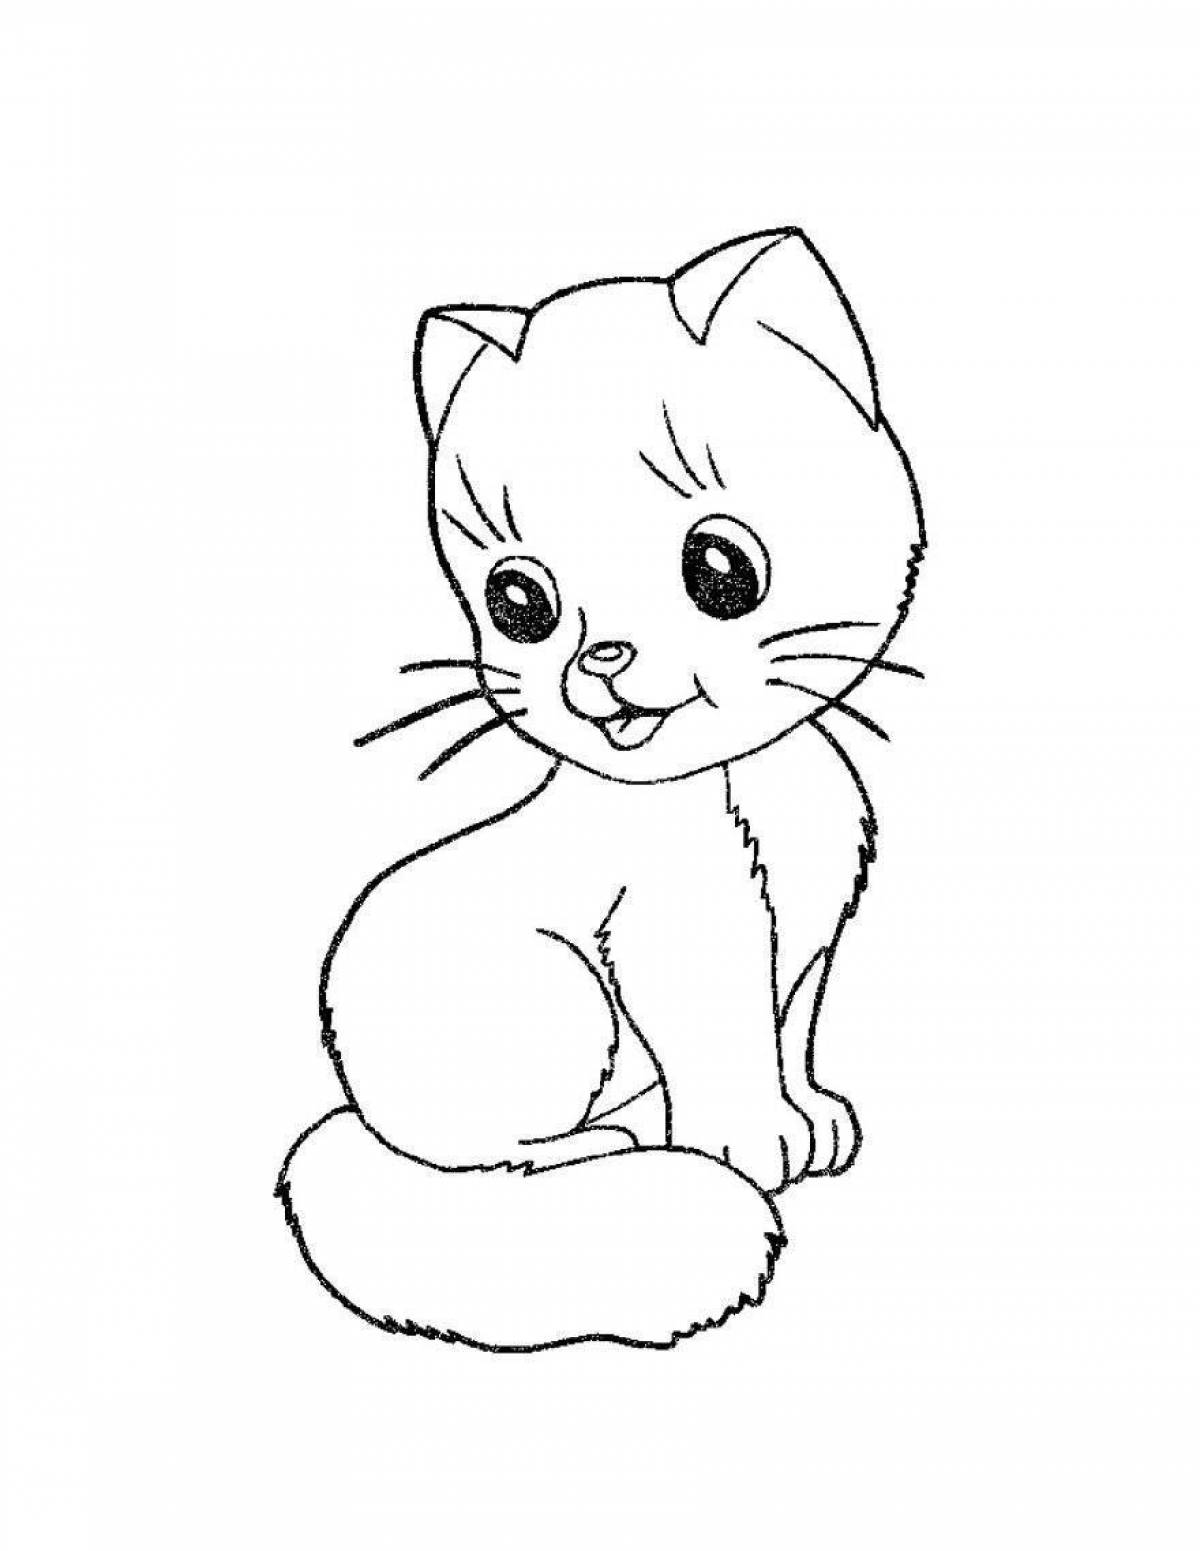 Snuggly coloring page kitty